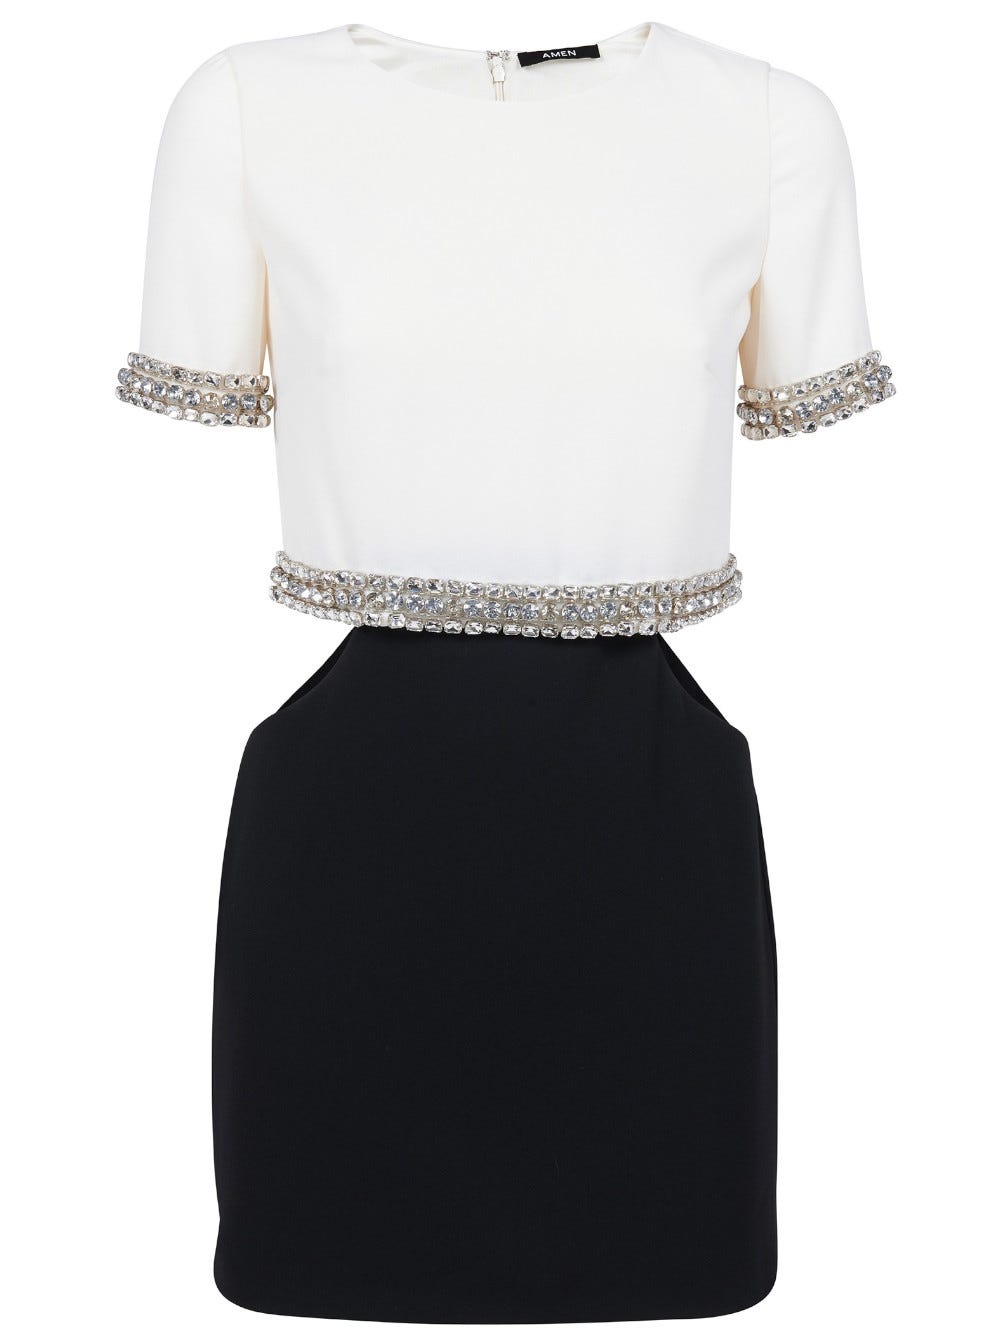 AMEN BLACK AND WHITE SHORT DRESS WITH CUT-OUT AND JEWEL DETAILING